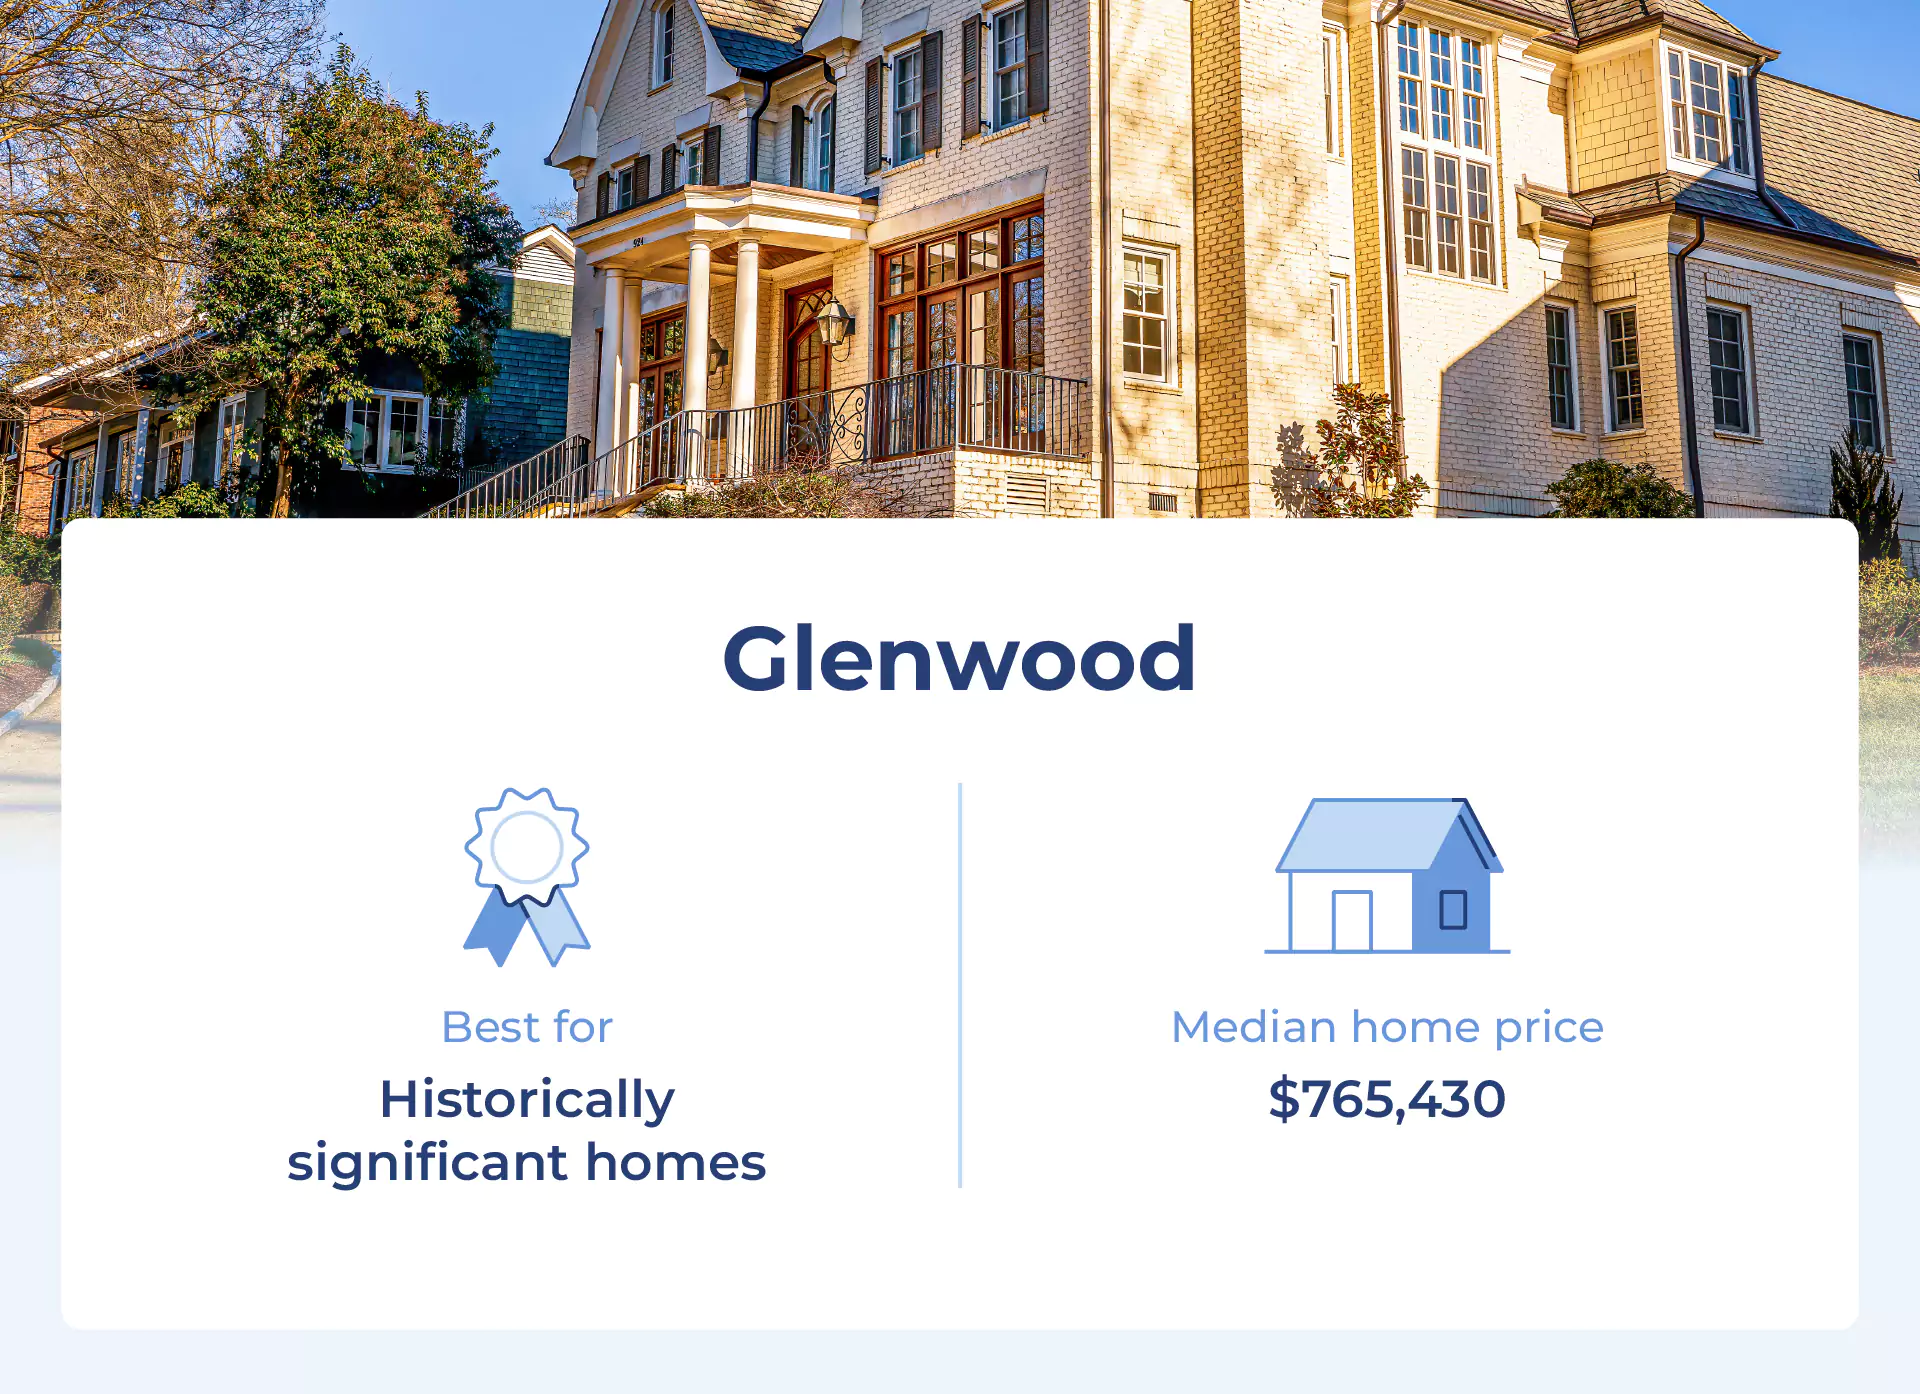 Image shows the median price for one of the best neighborhoods in Raleigh, Glenwood.